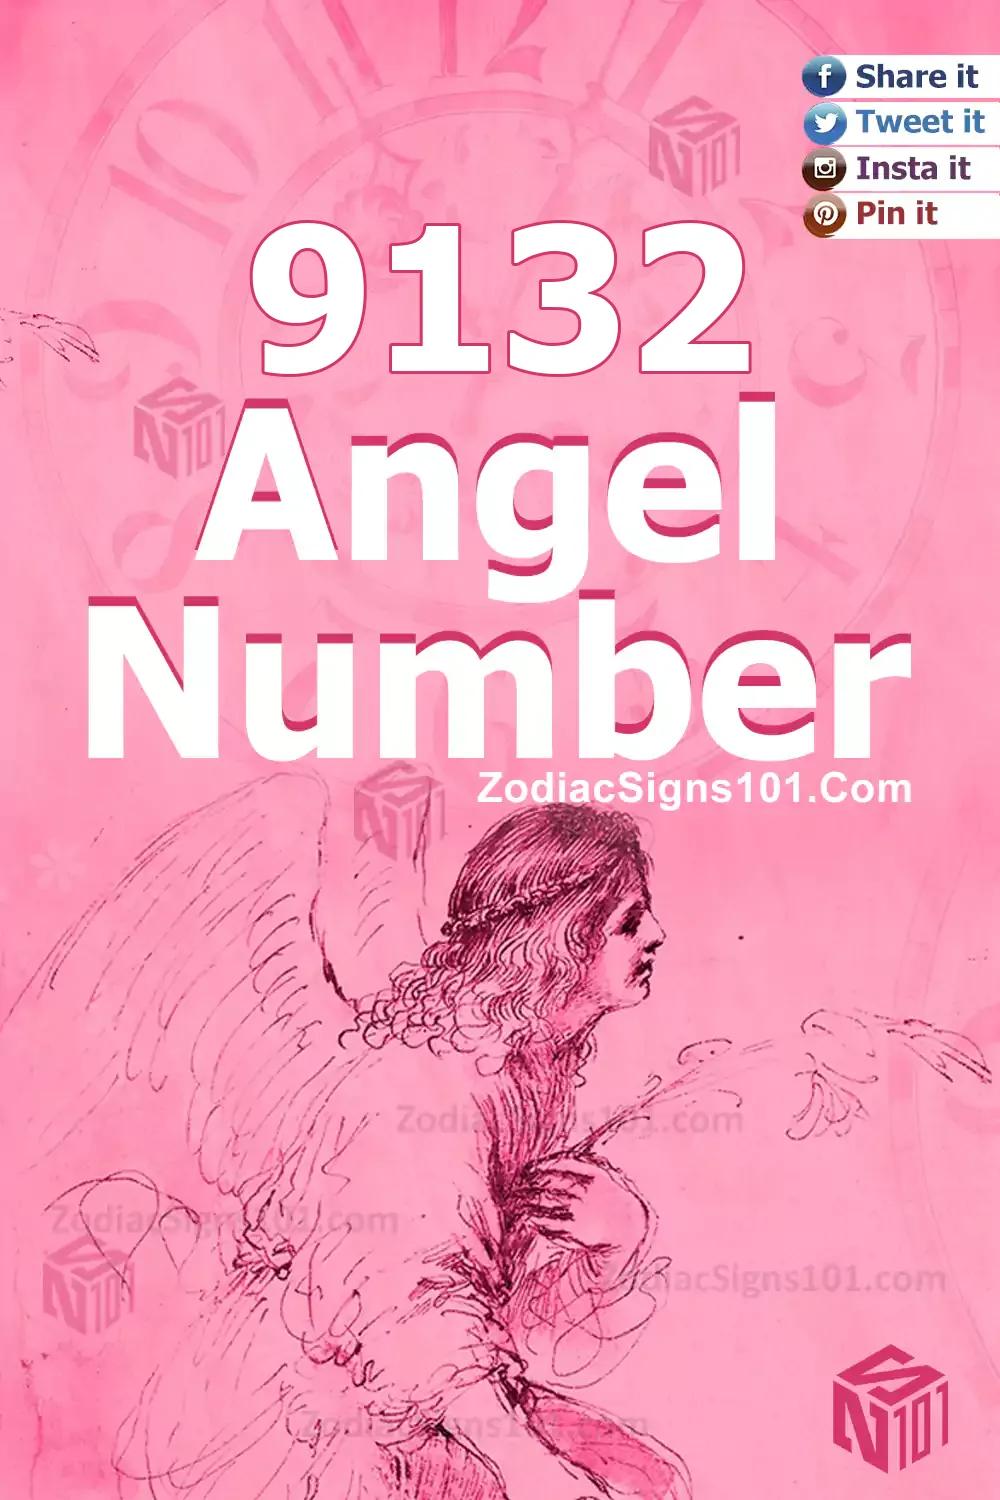 9132 Angel Number Meaning